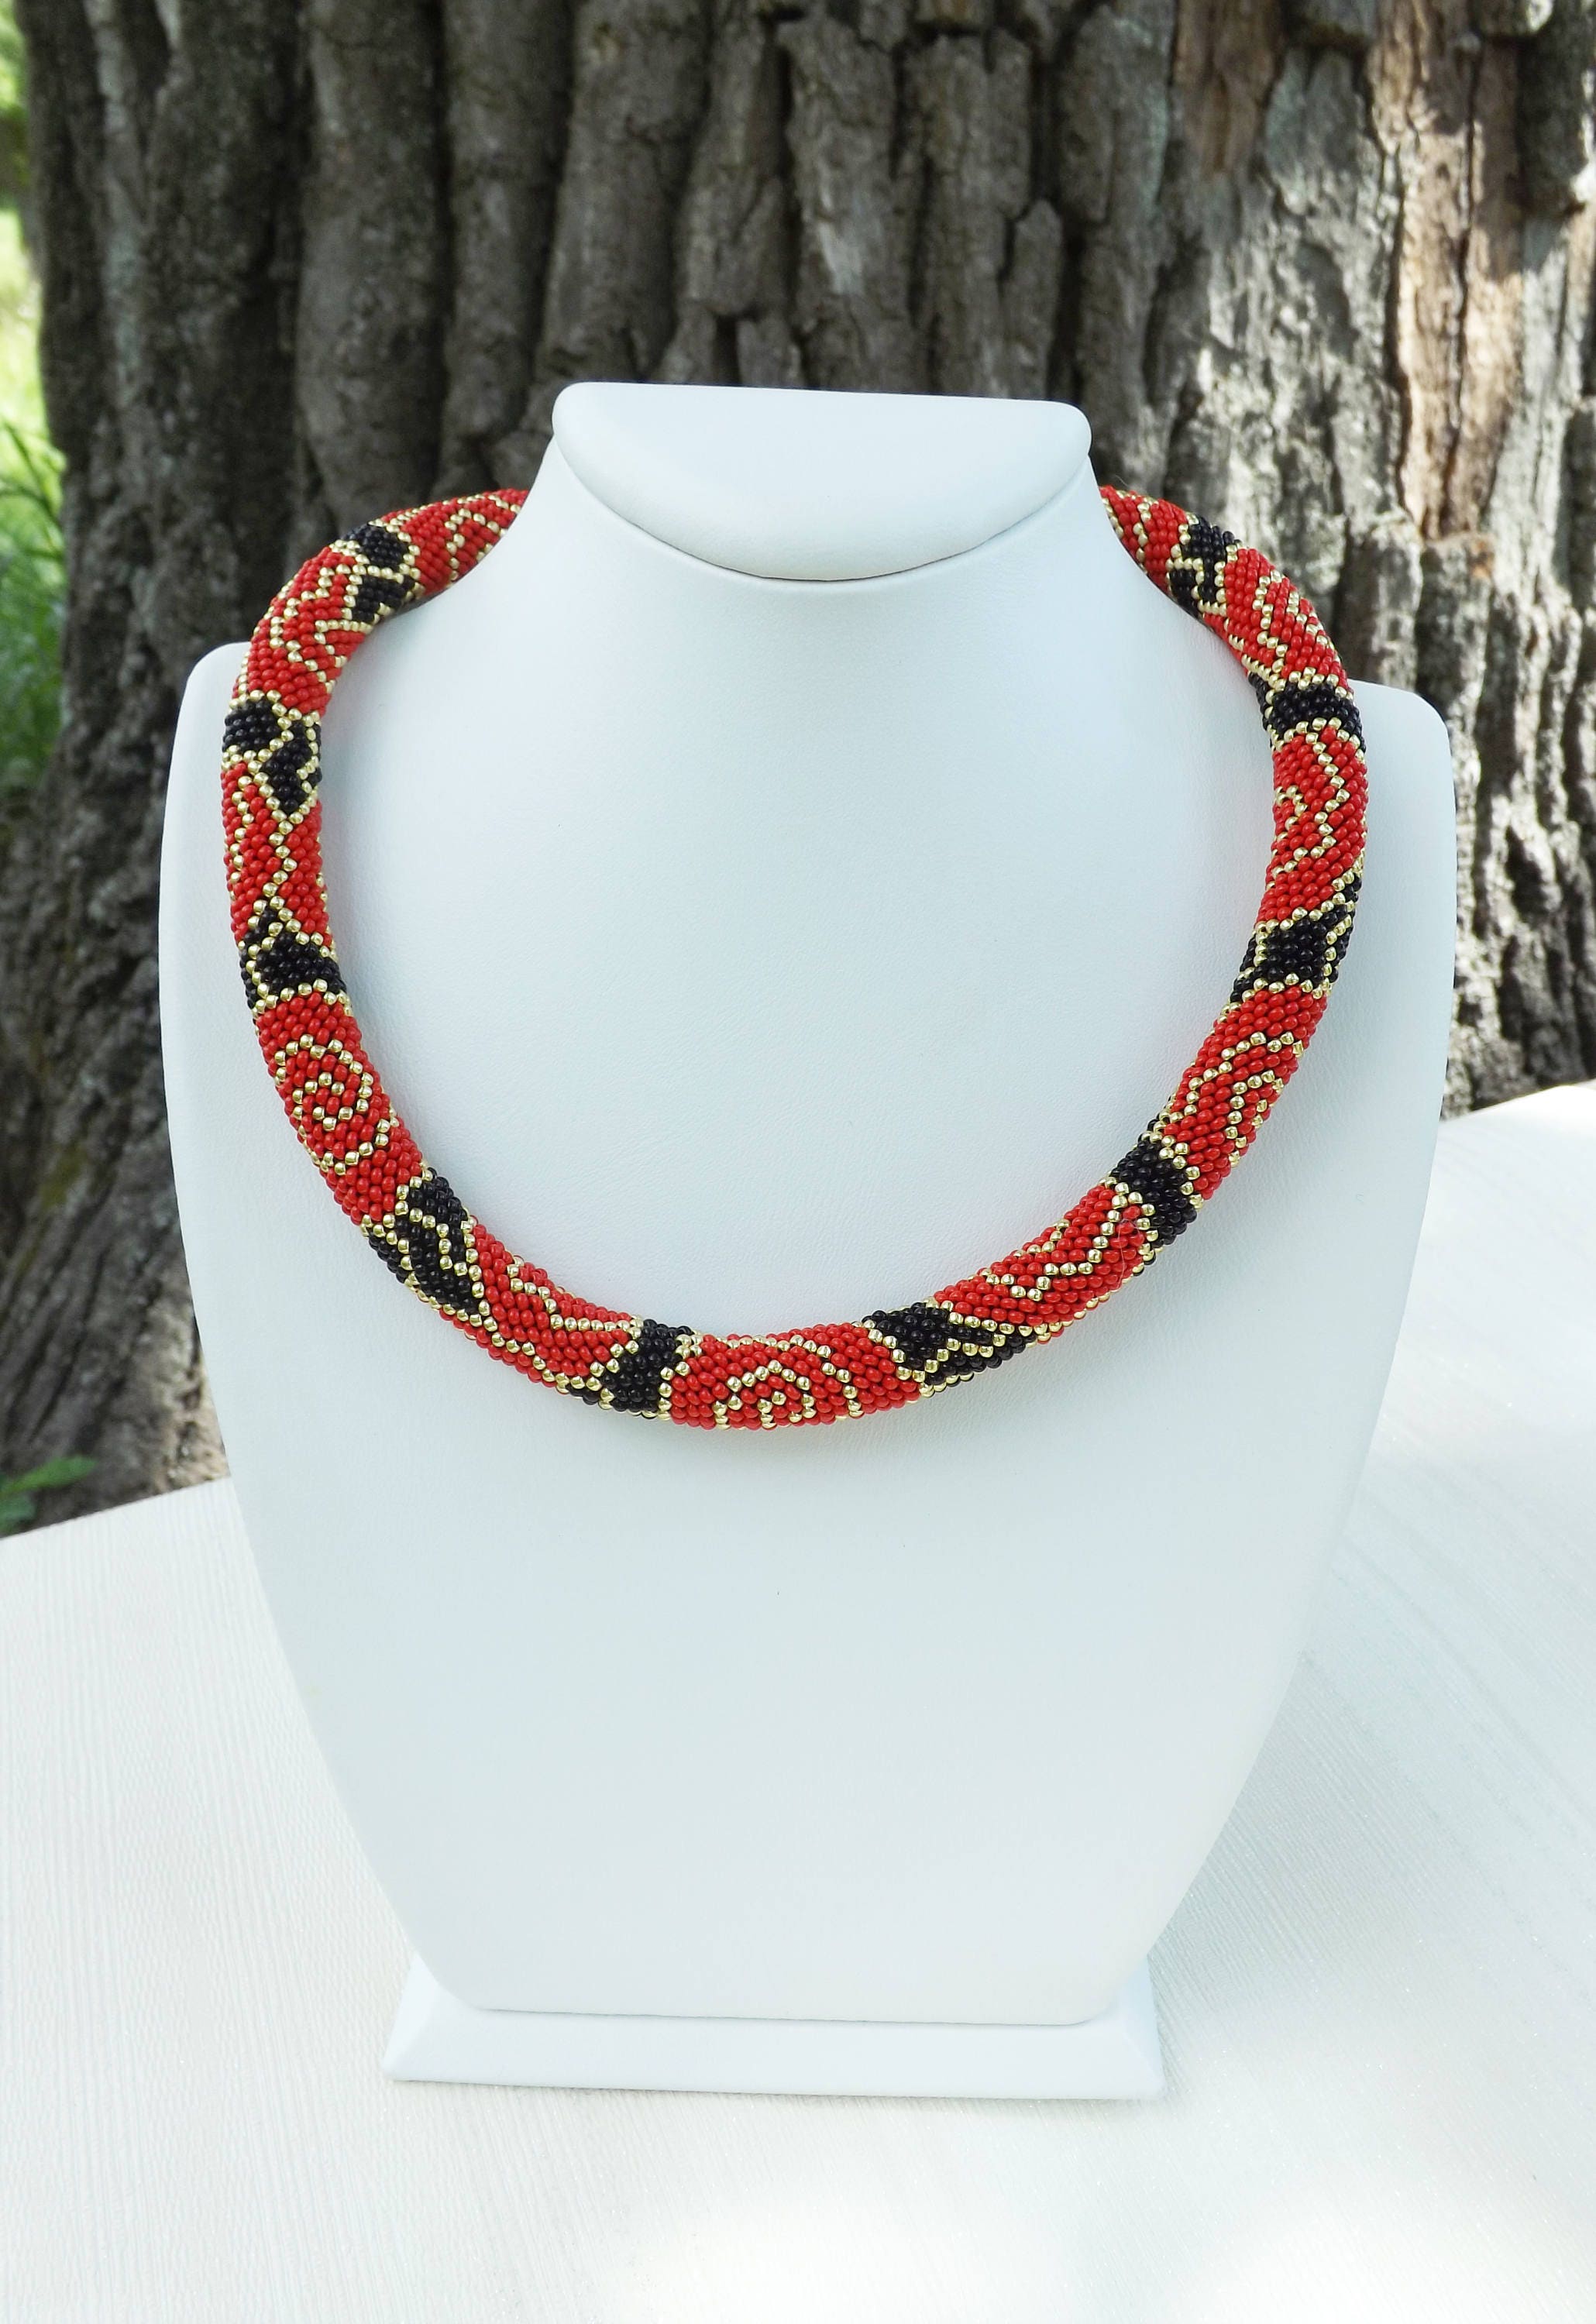 real flower necklace red necklace rose necklace nature